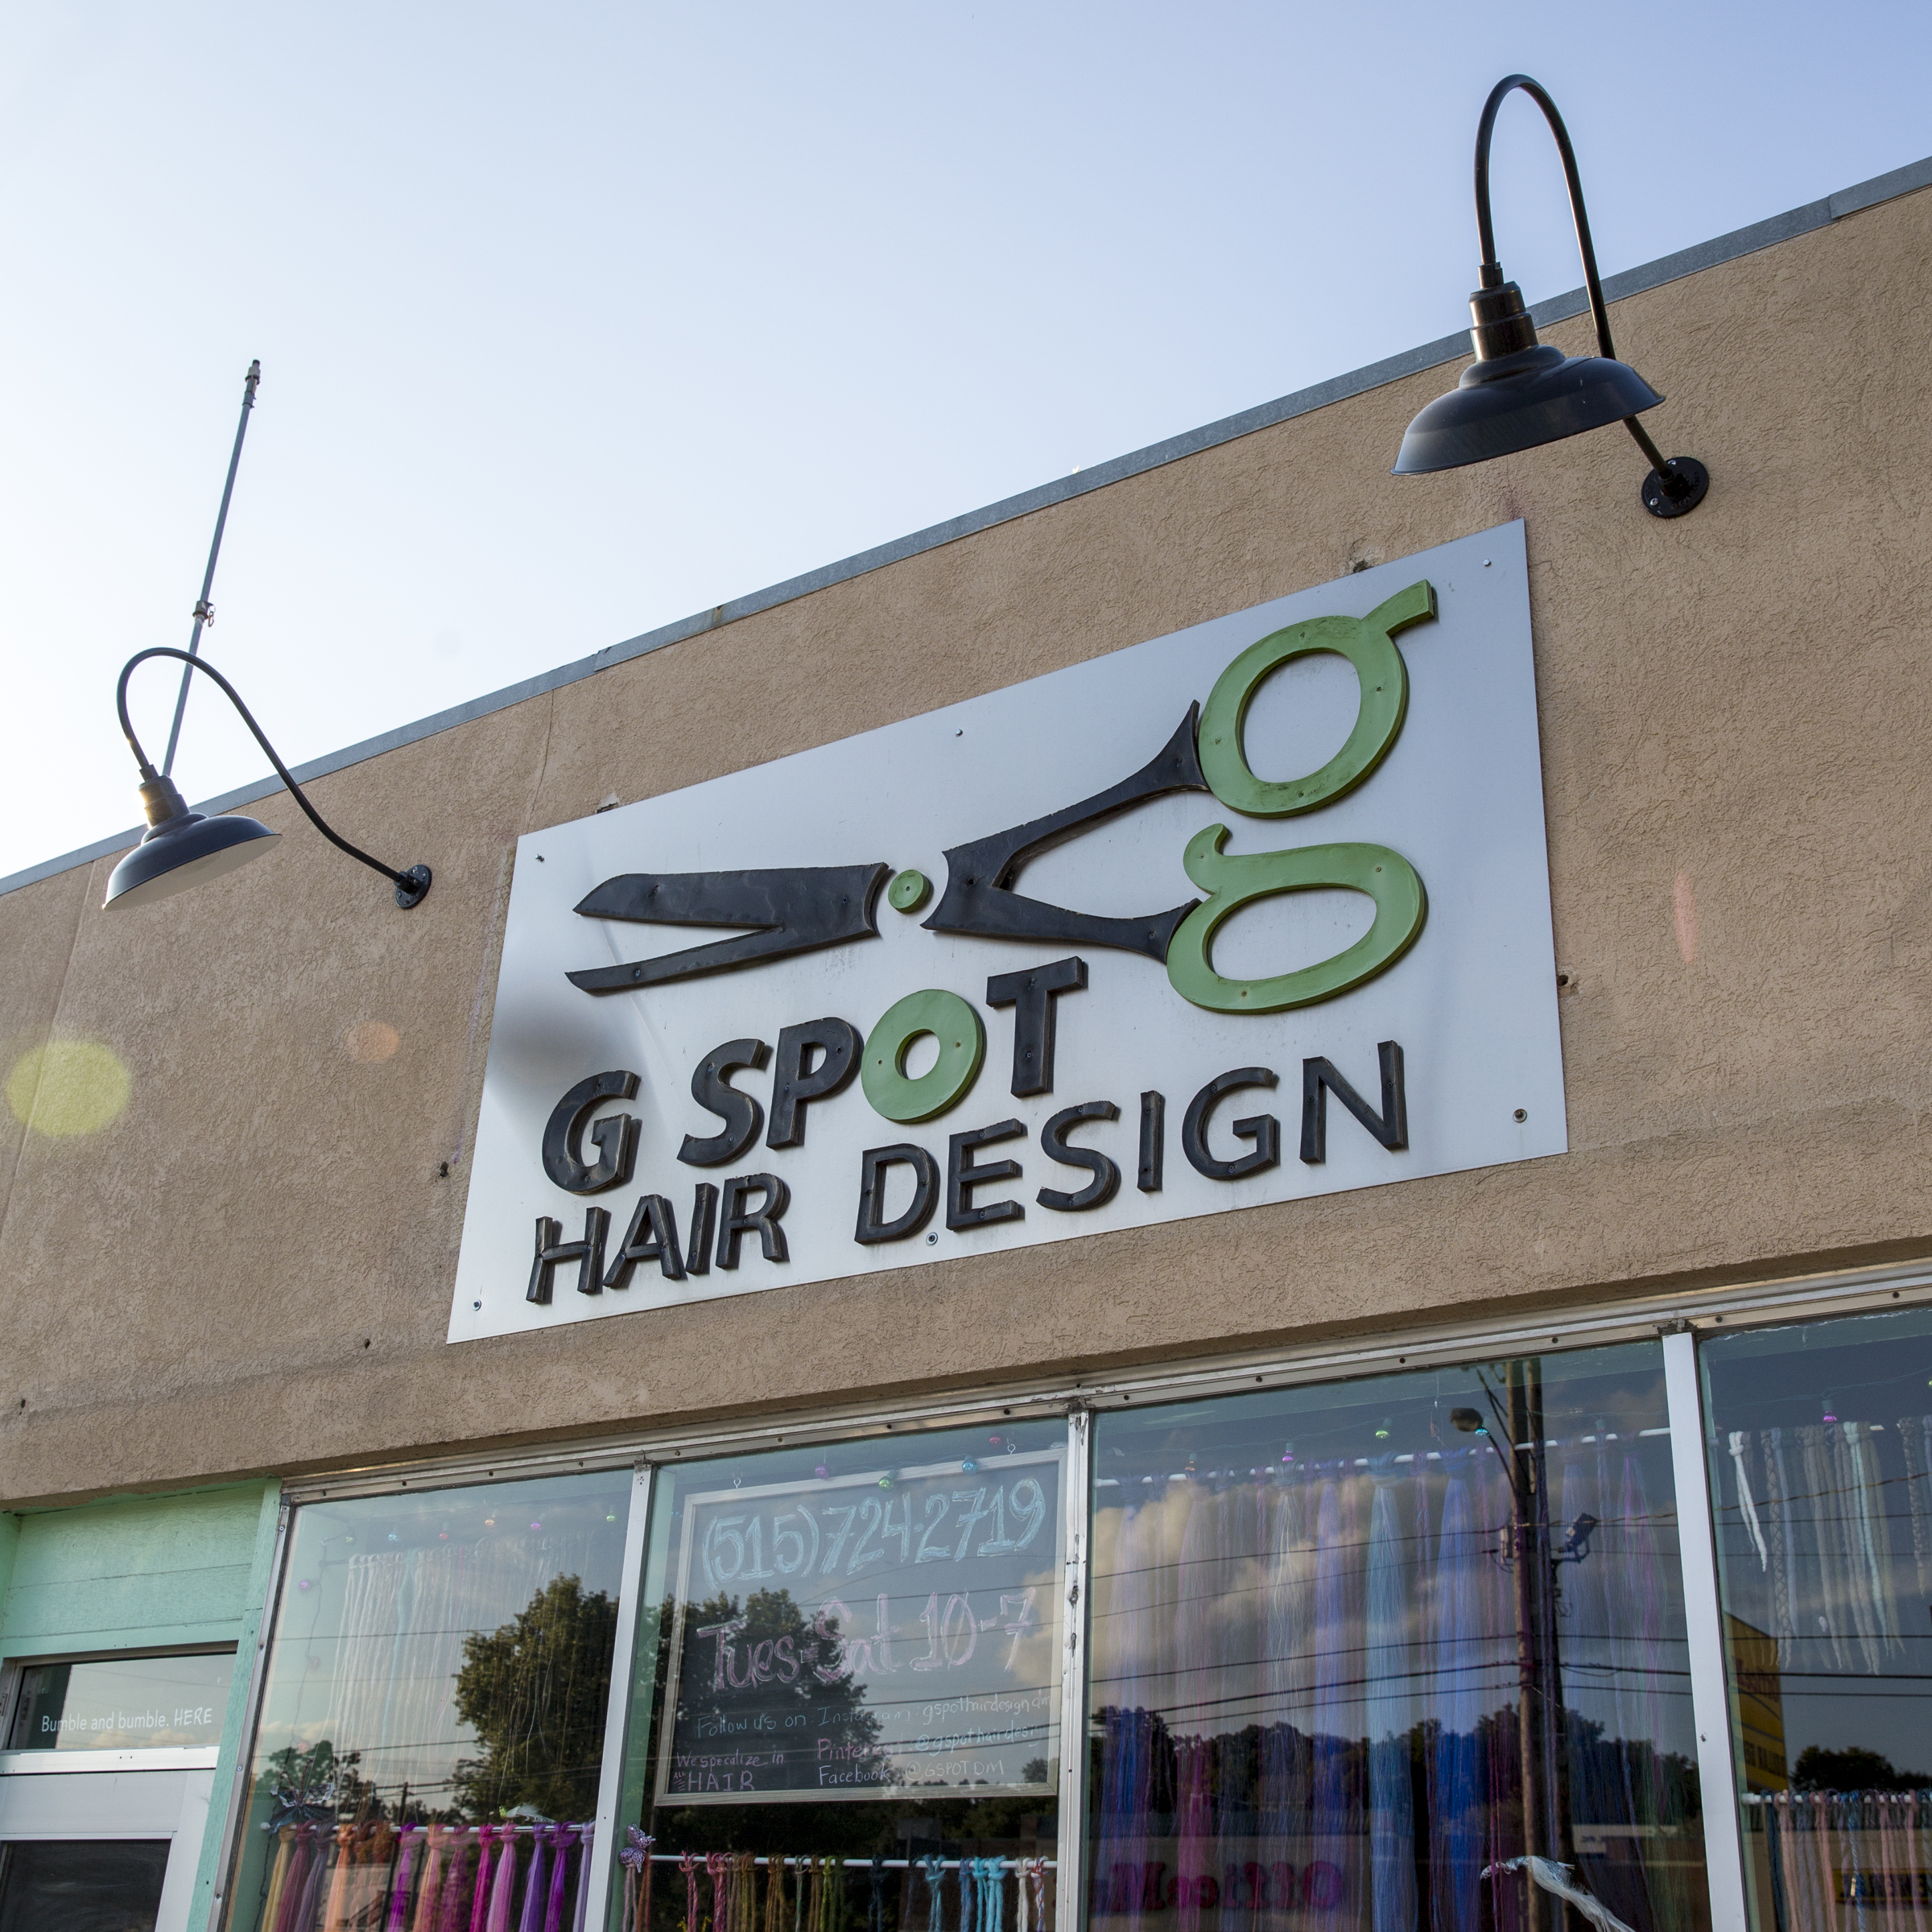 G Spot Hair Design - The Avenues The Avenues